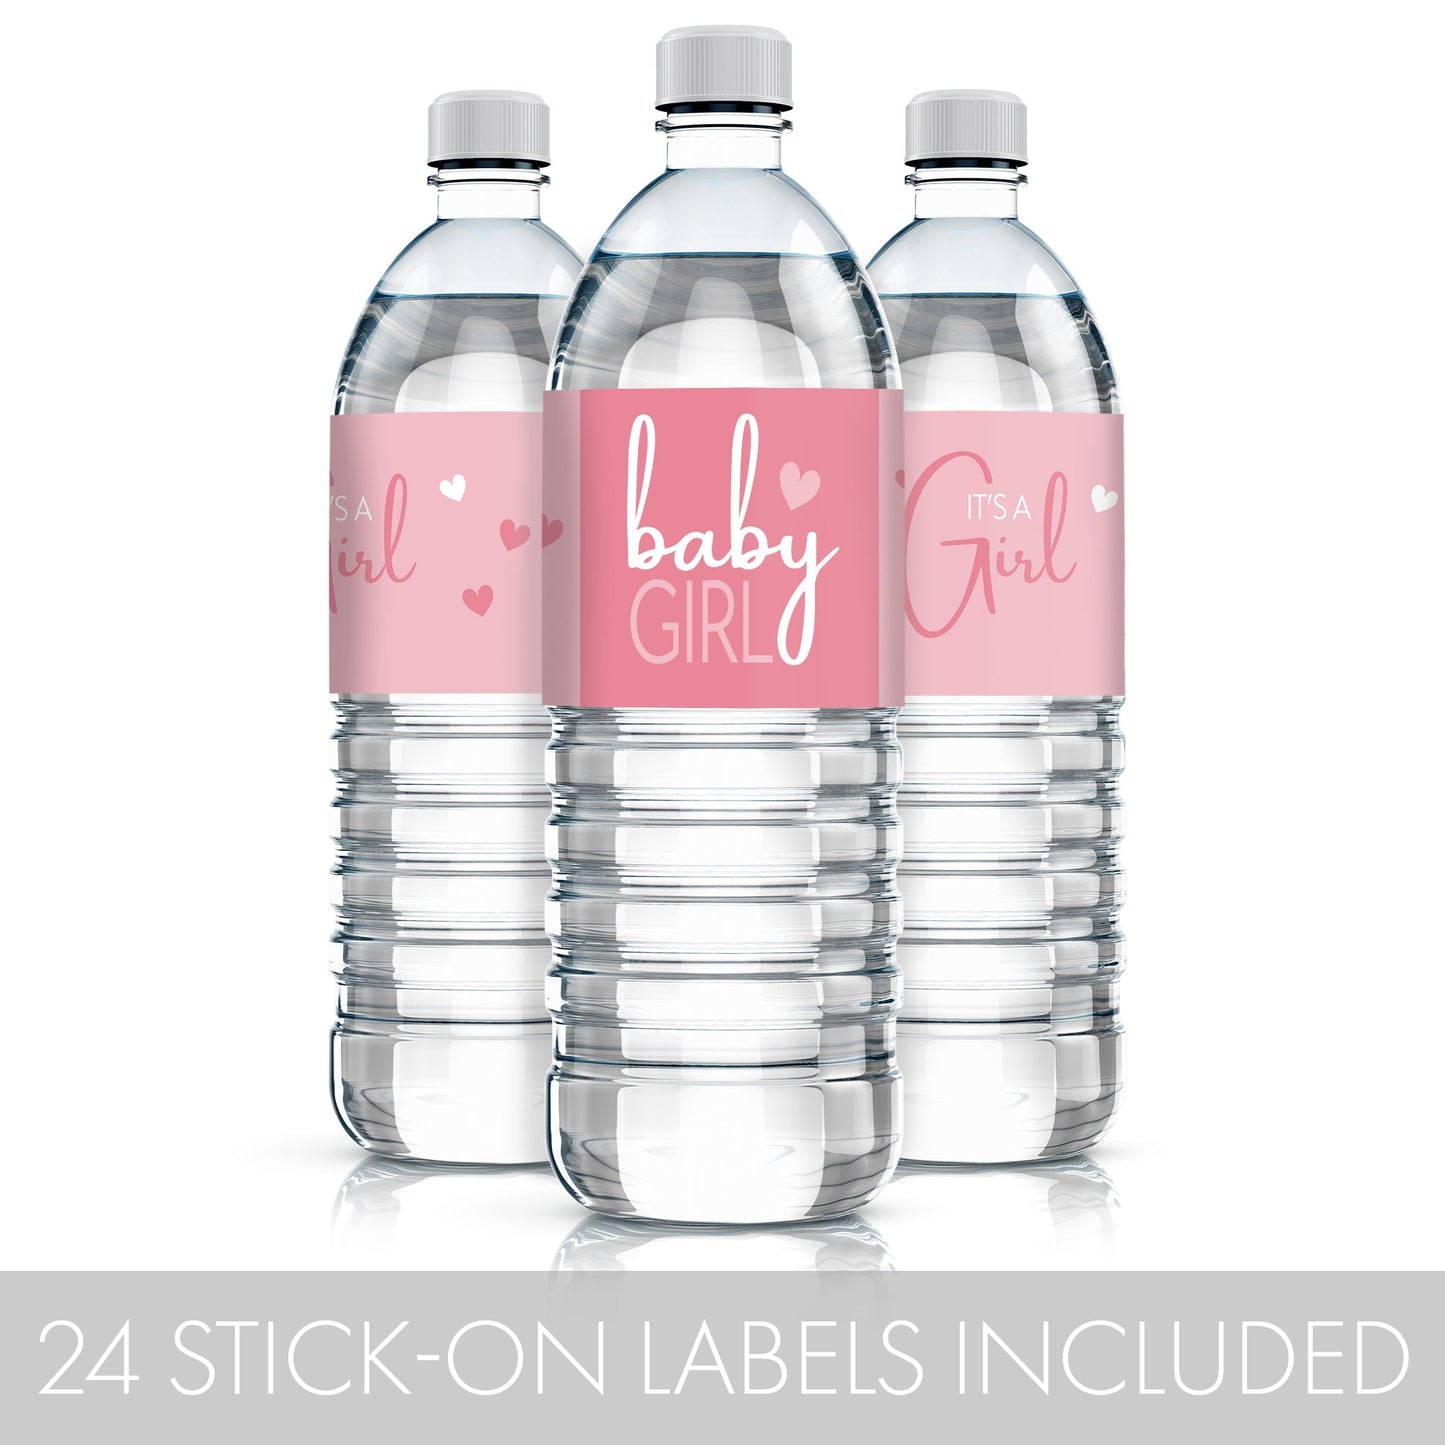 24 stickers of Pink It's a Girl water bottle labels to decorate your baby shower